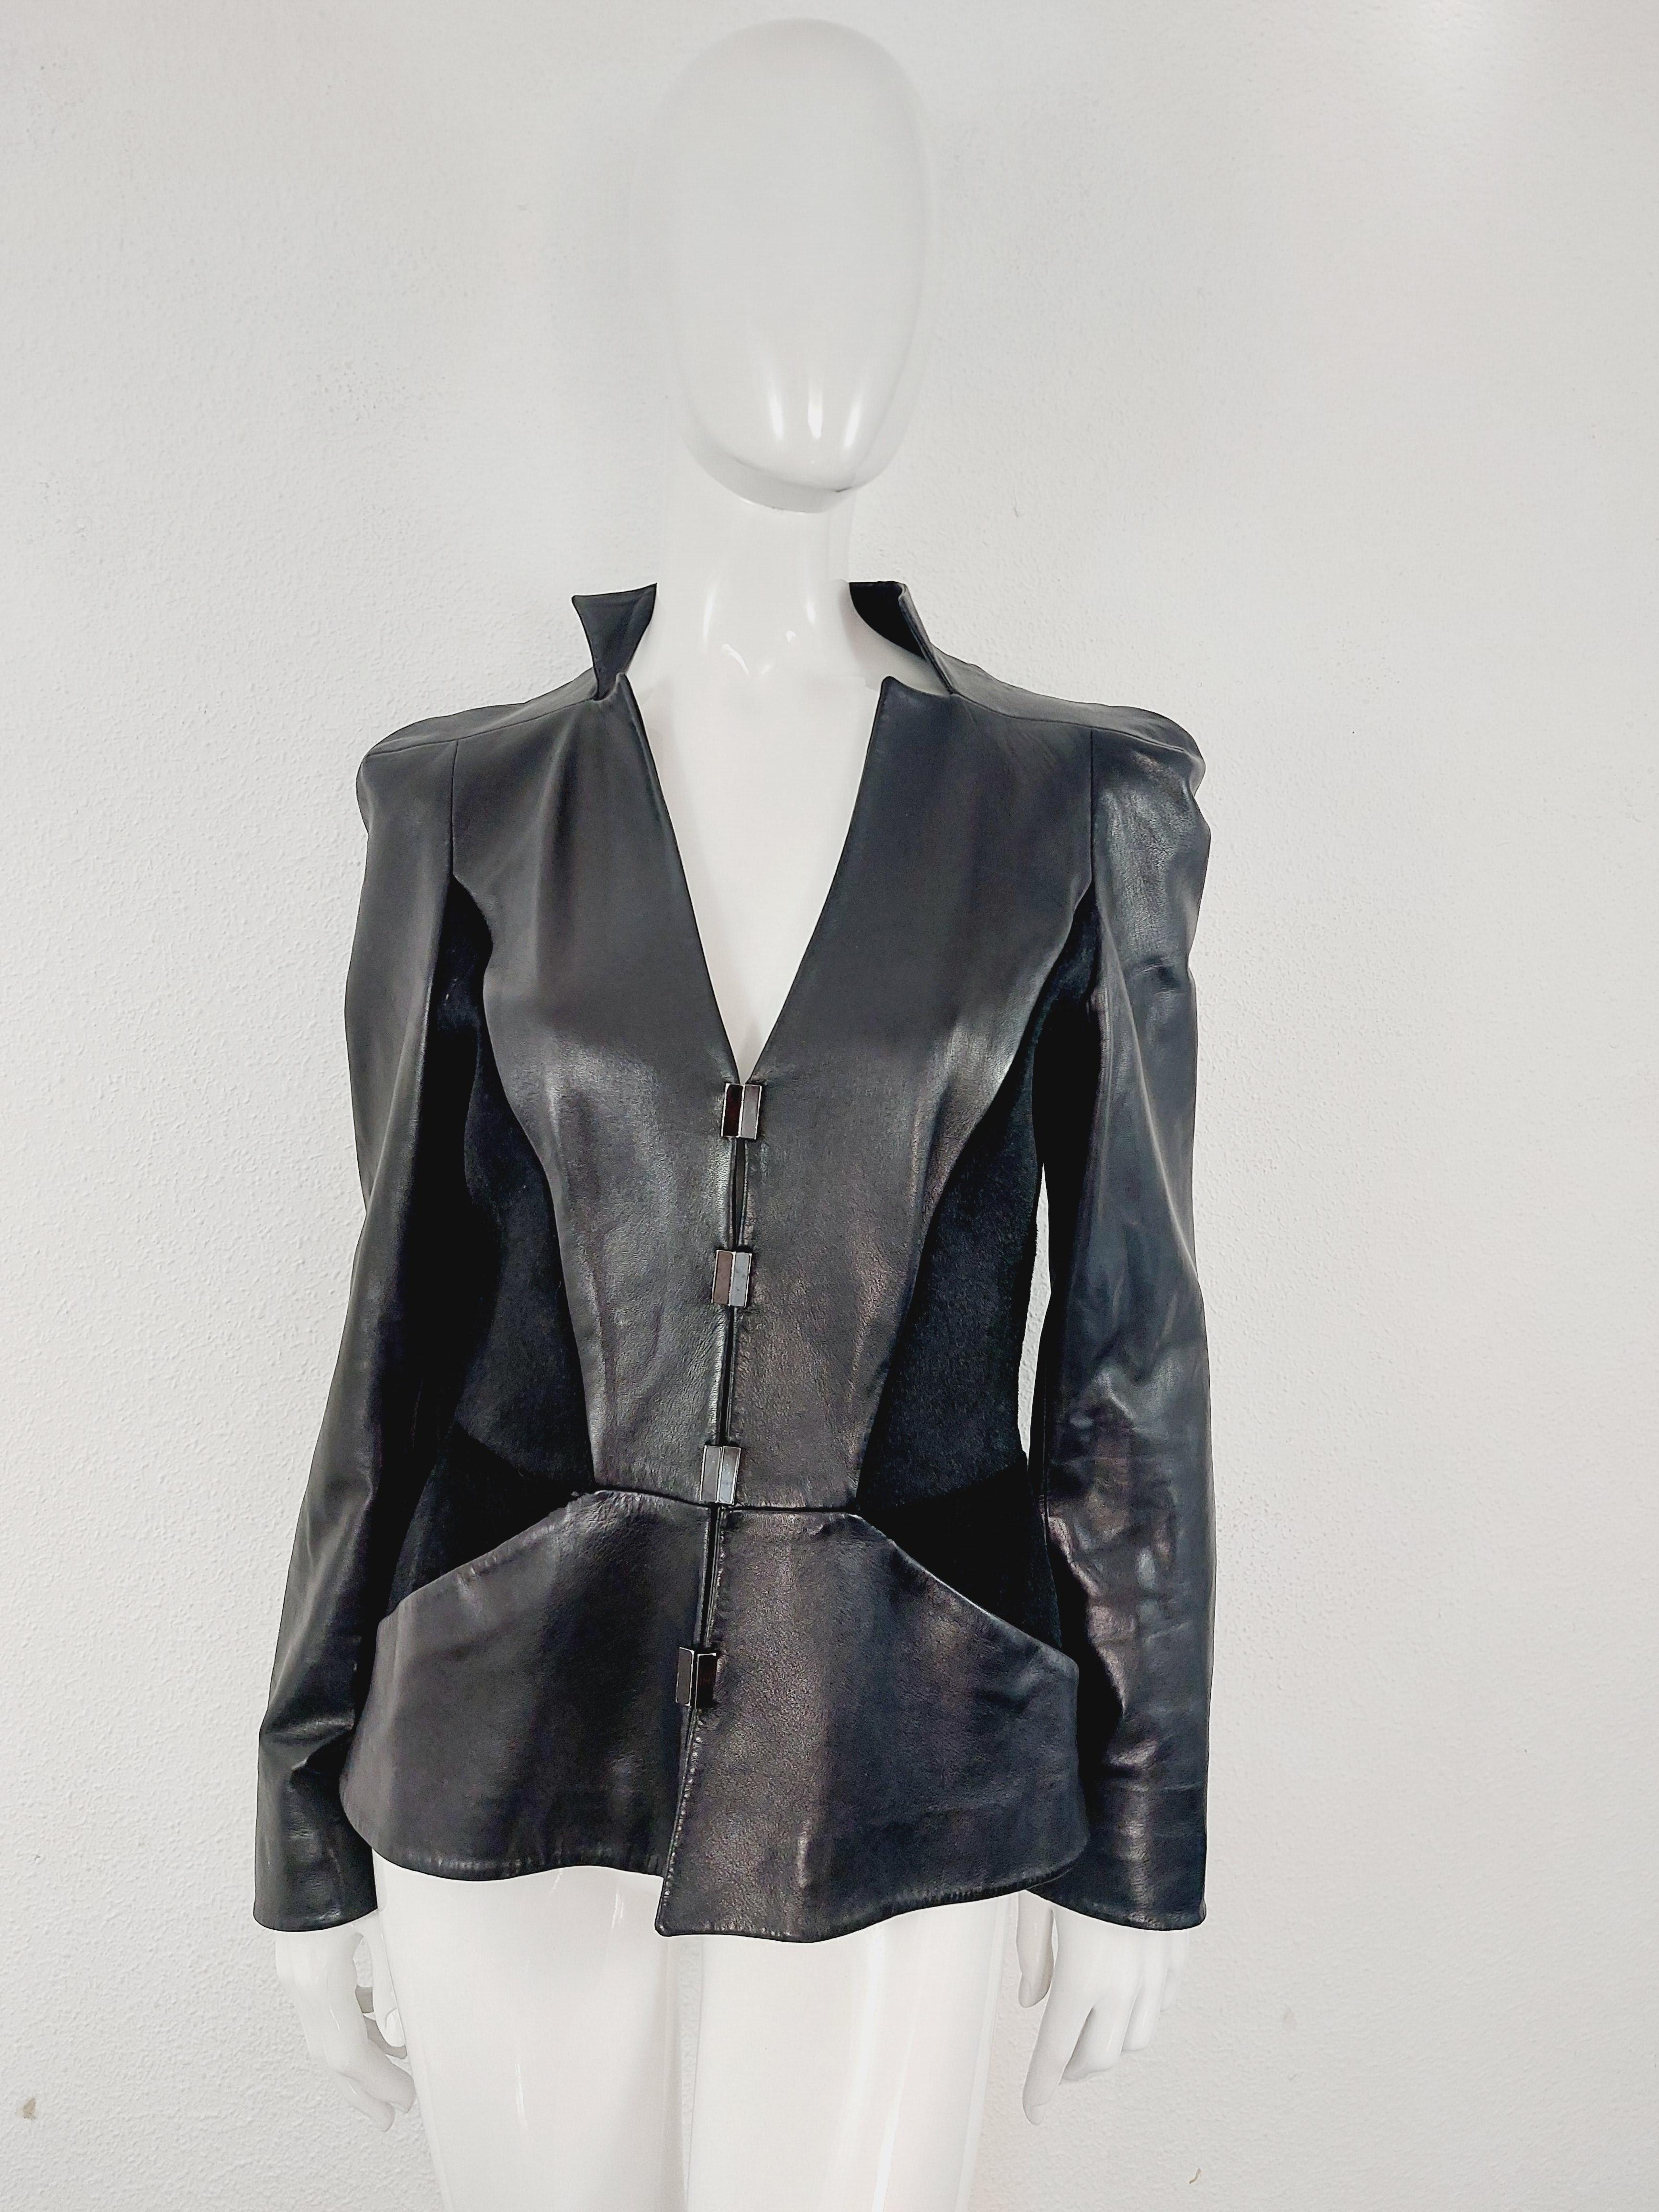 Thierry Mugler Couture Leather Lambskin Runway Motorcycle Wasp Waist Jacket For Sale 4